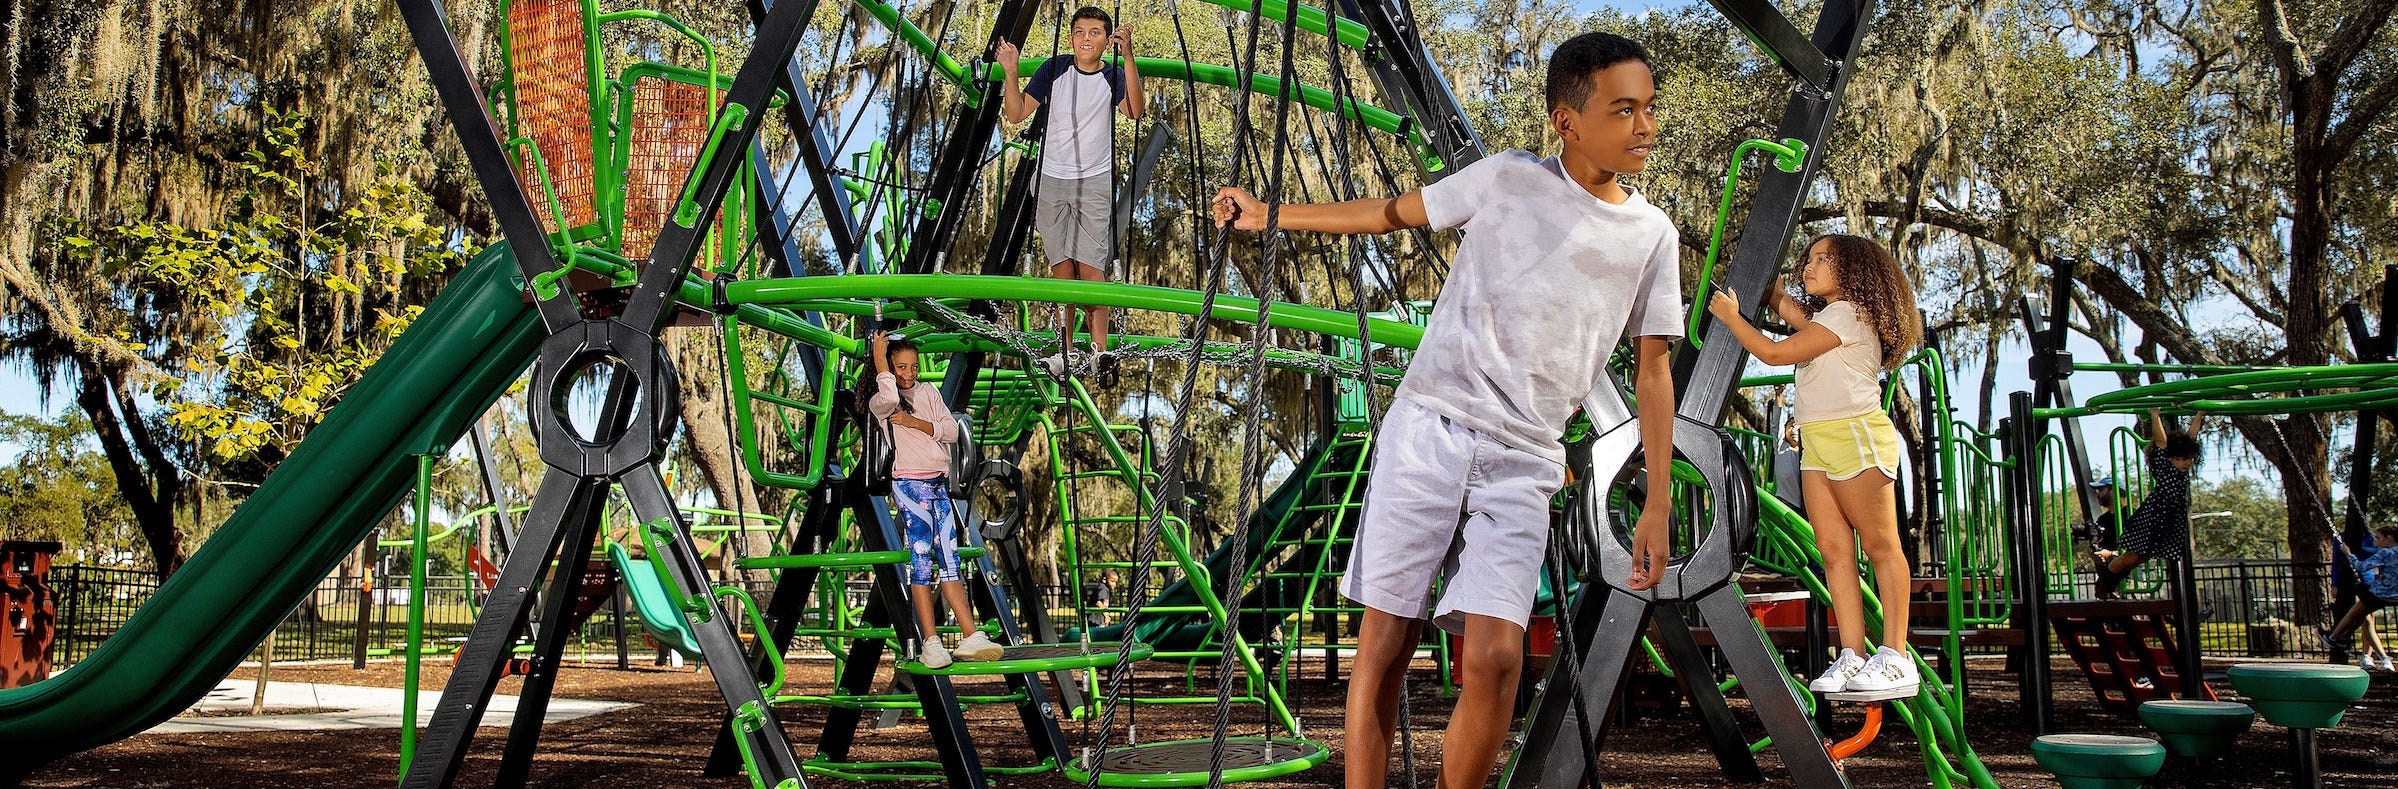 Top Five Park and Playground Trends for 2022